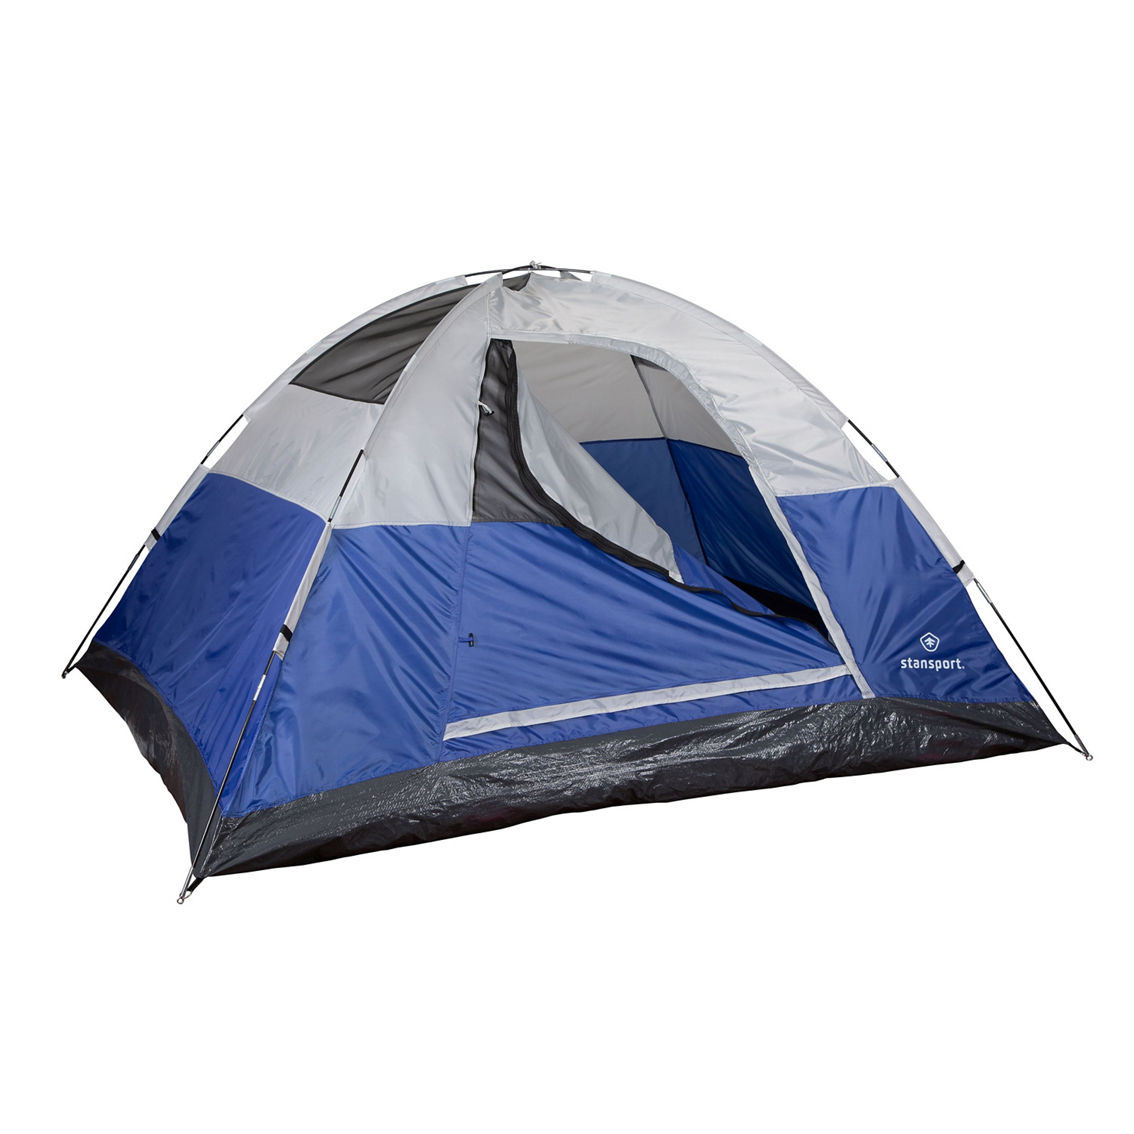 Stansport Pine Creek Dome Tent - Image 3 of 5